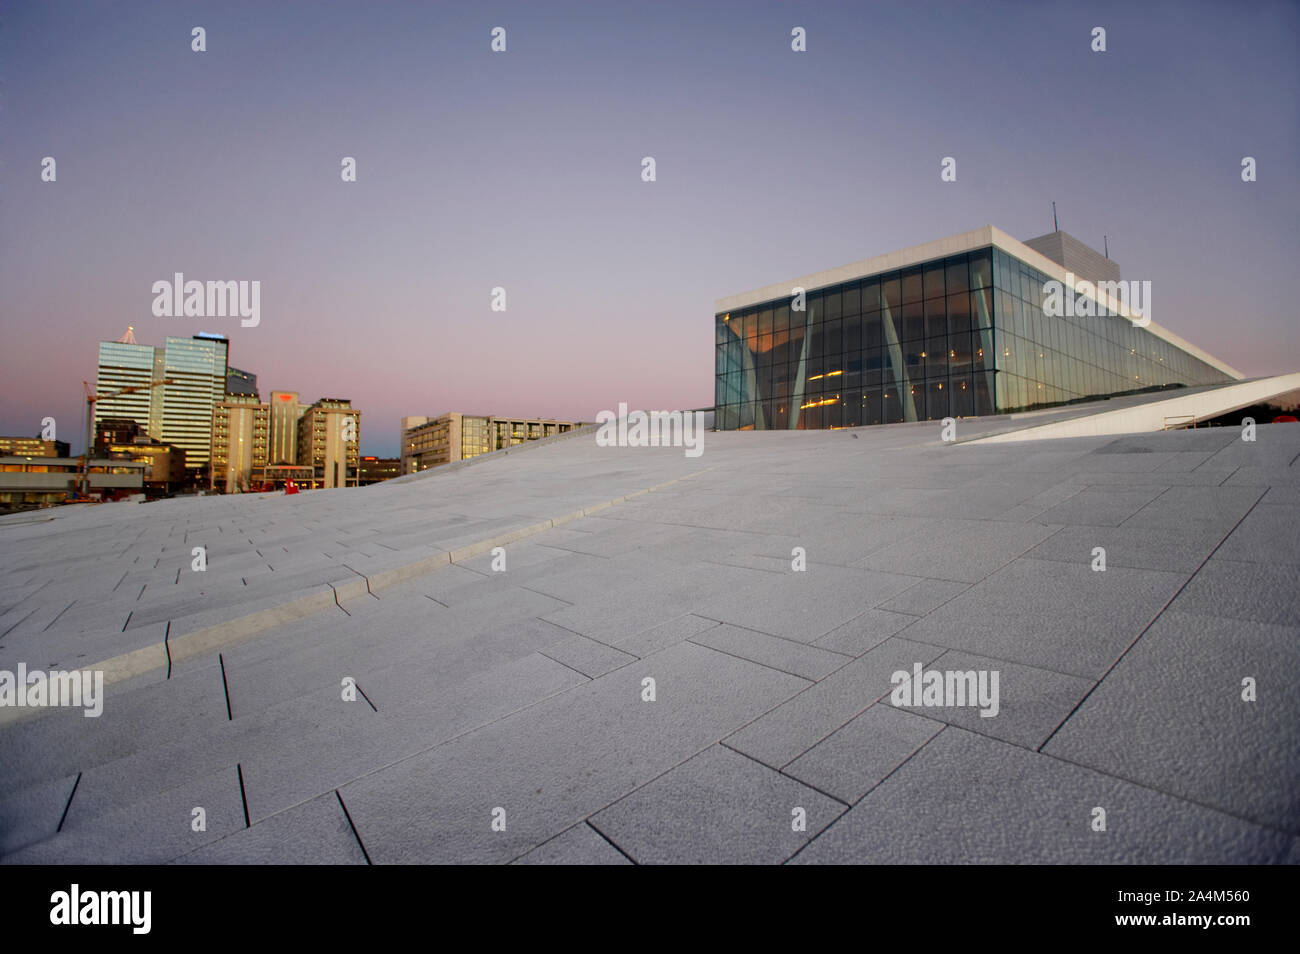 The Opera house in Oslo - Italian marble is widely used Stock Photo